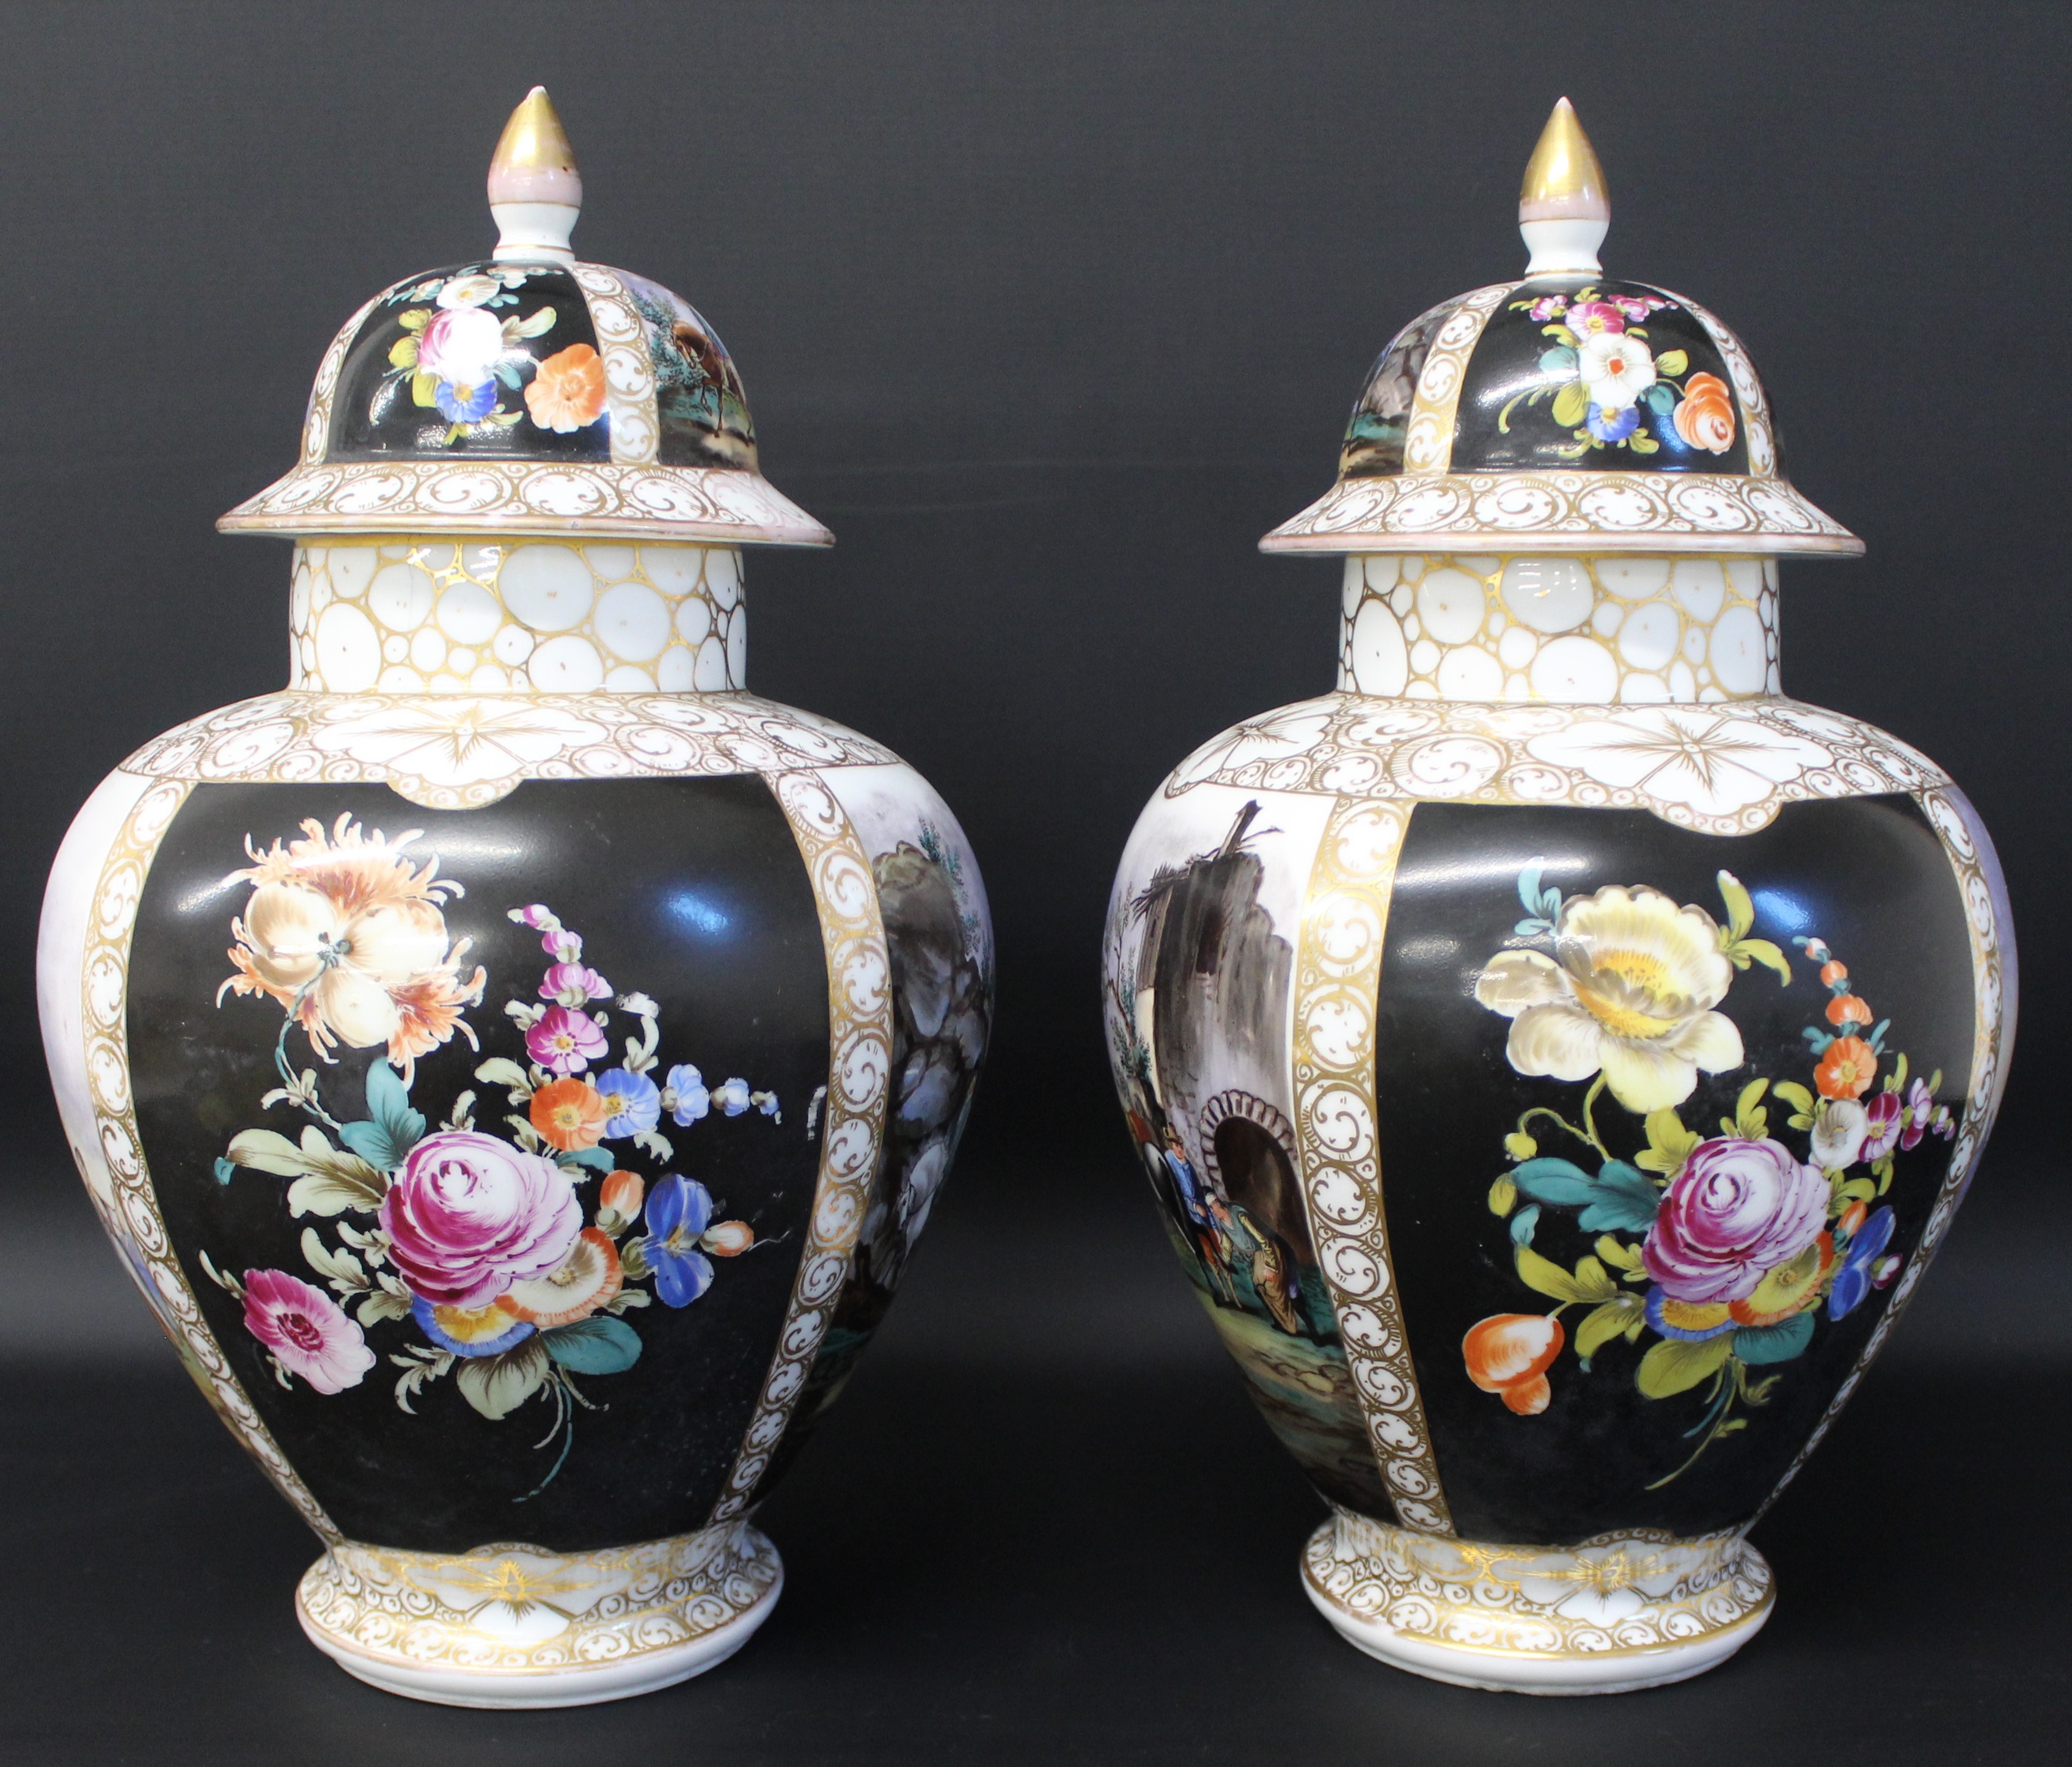 Pair of large 19th century Augustus Rex porcelain jars and covers, each with polychrome decoration - Image 7 of 9